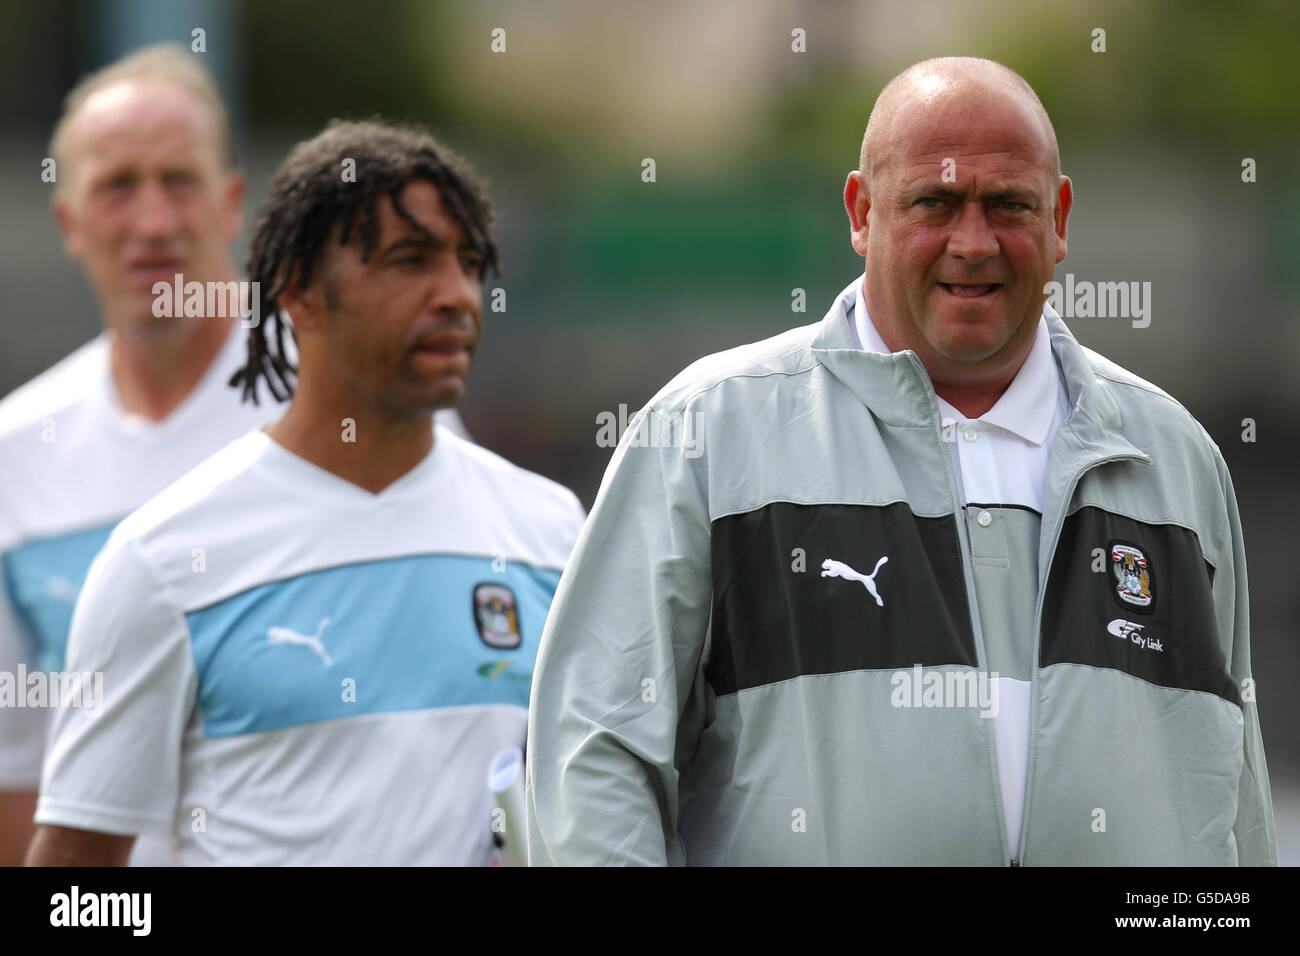 Soccer - Pre Season Friendly - Bristol Rovers v Coventry City - Memorial Ground. Coventry City manager Andy Thorn (right) and coach Richard Shaw before the match Stock Photo